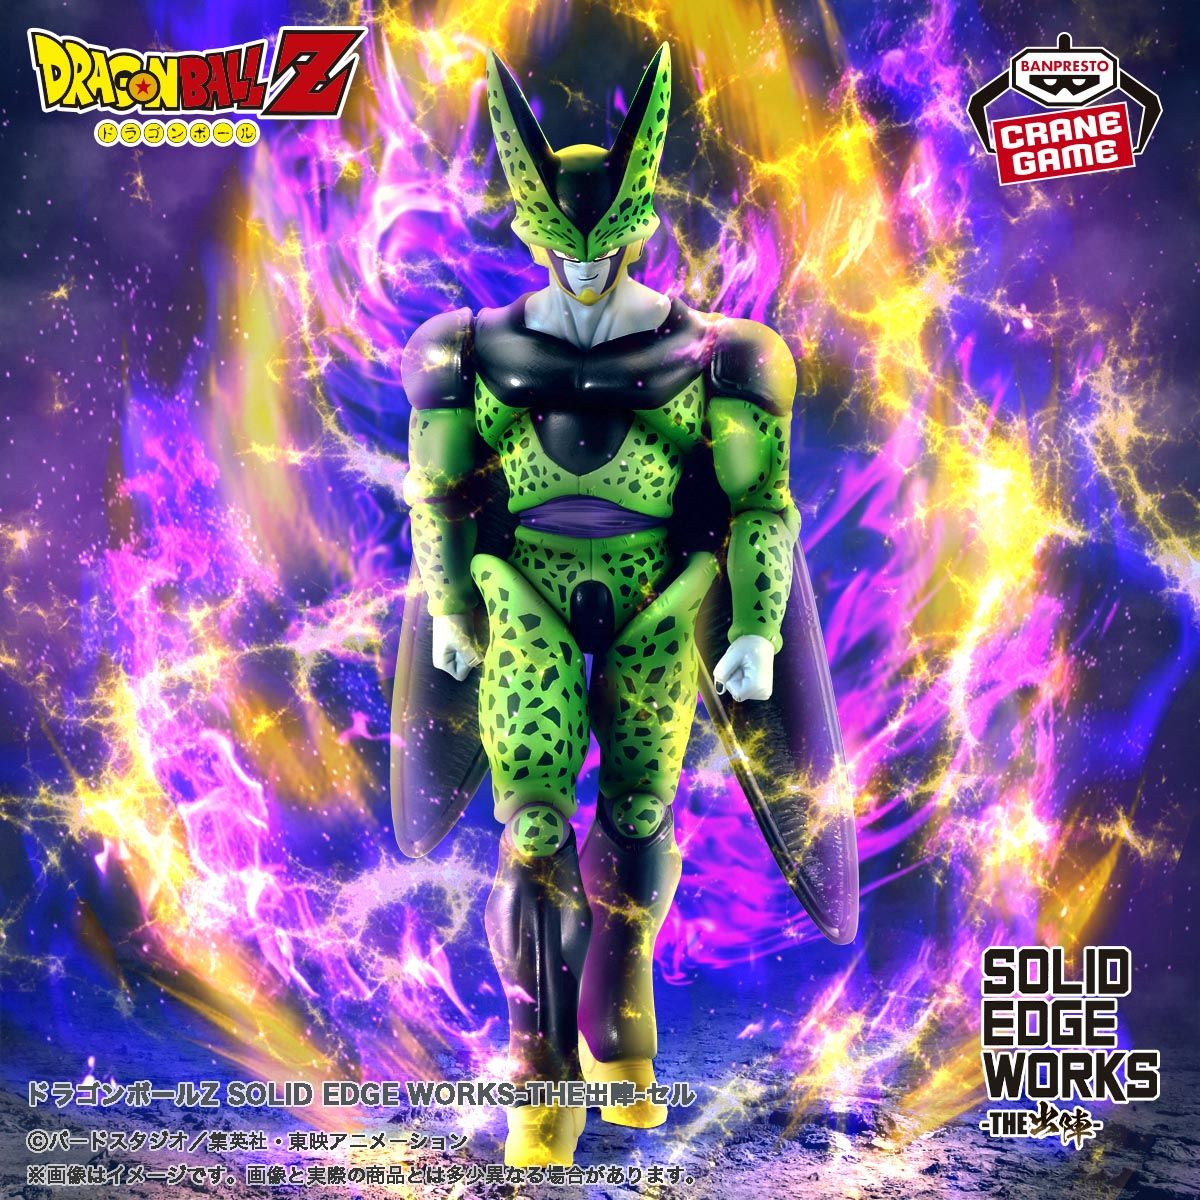 Cell Finally Joins the SOLID EDGE WORKS -THE SHUTSUJIN- Series!